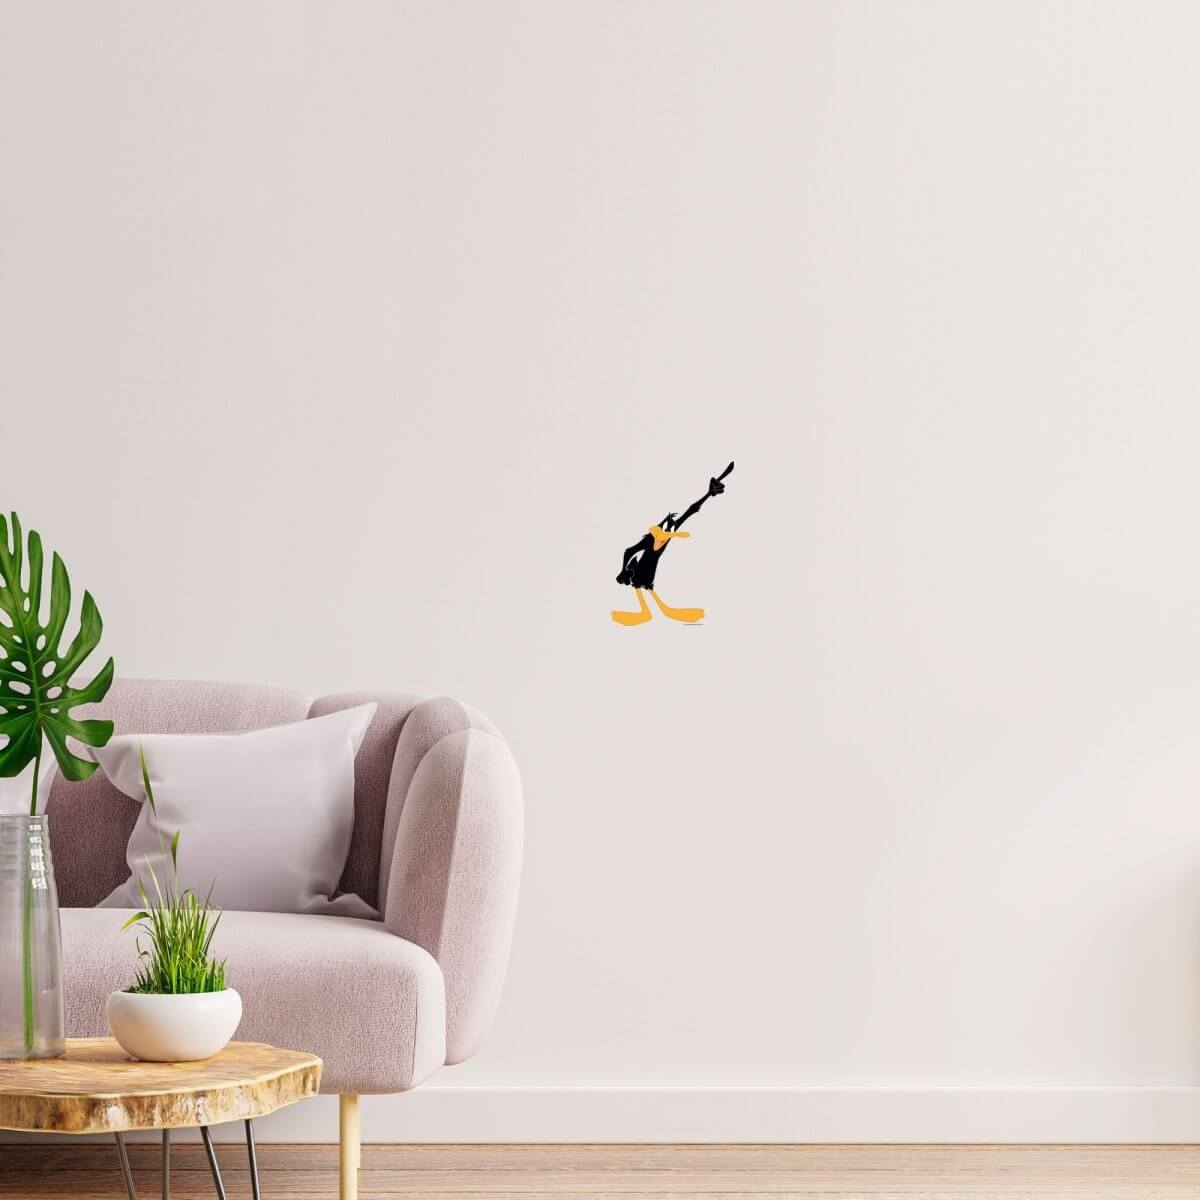 Kismet Decals Looney Tunes Daffy Duck Annoyed Licensed Wall Sticker - Easy DIY Home & Kids Room Decor Wall Decal Art - Kismet Decals